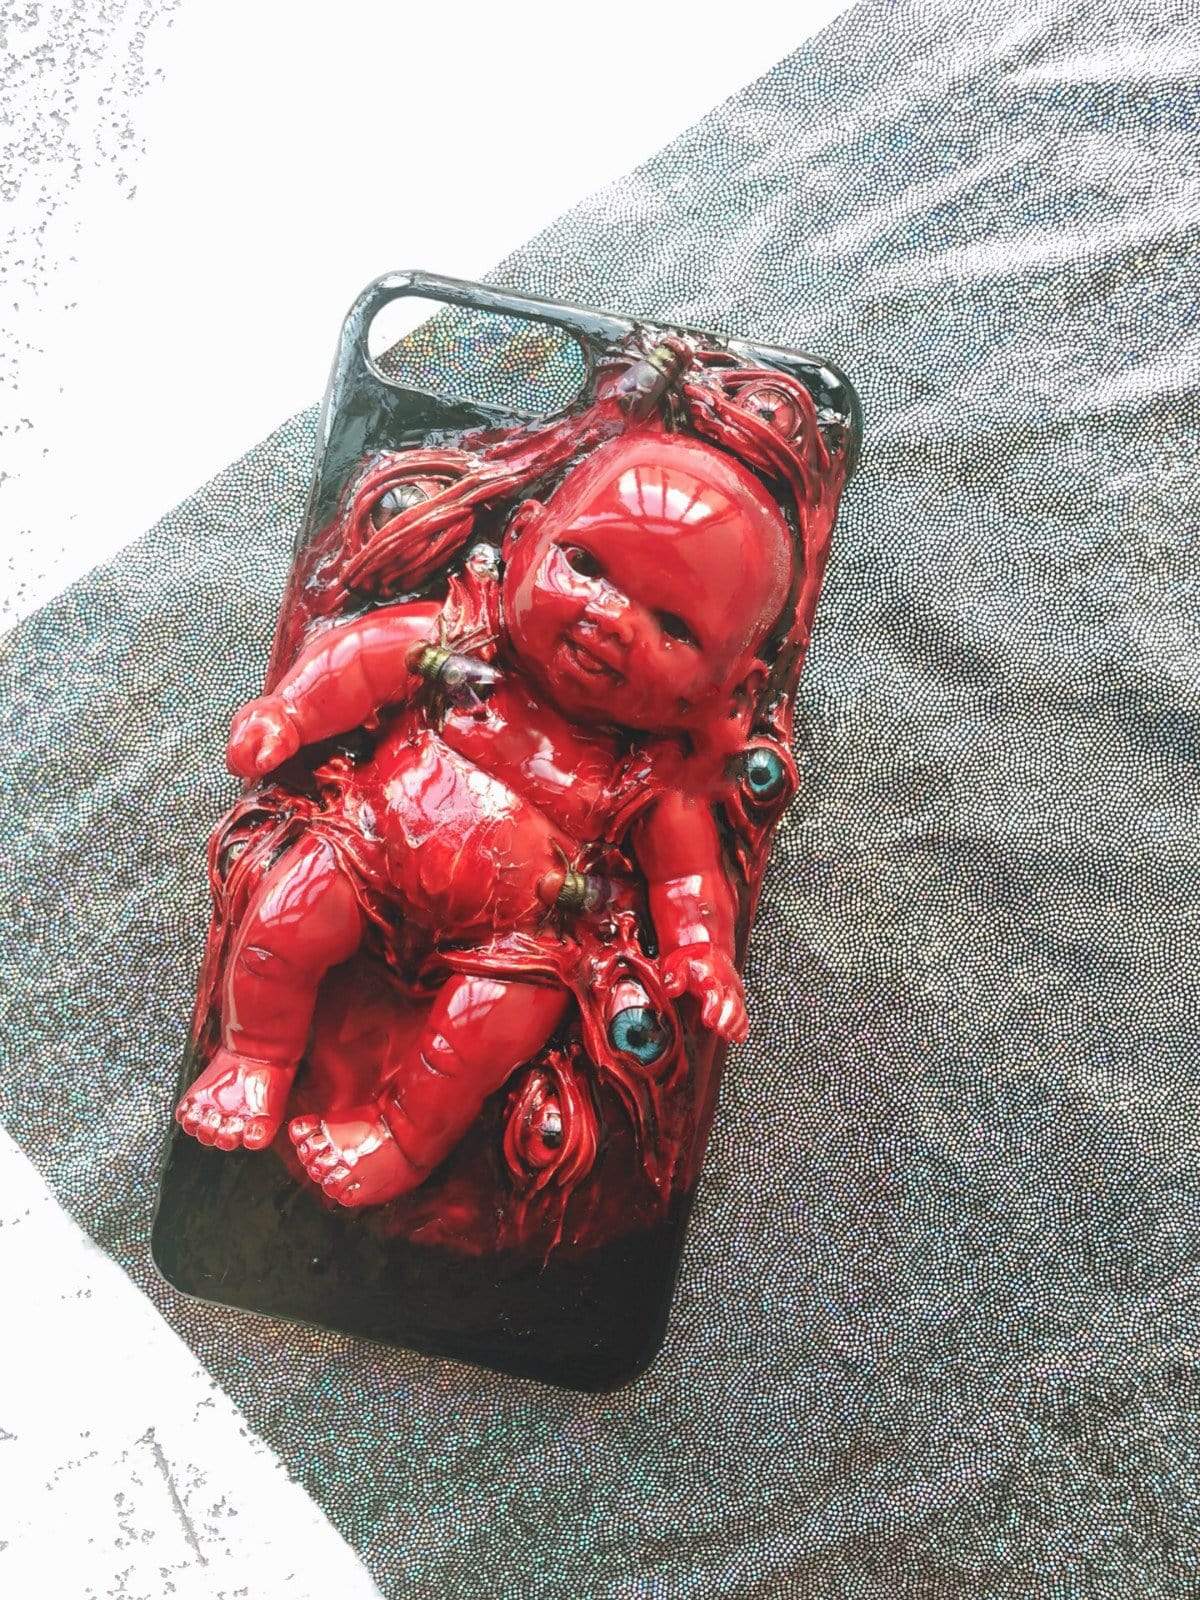 The Blood Baby Handmade Designer iPhone Case For iPhone SE 11 Pro Max X XS Max XR 7 8 Plus - techypopcom